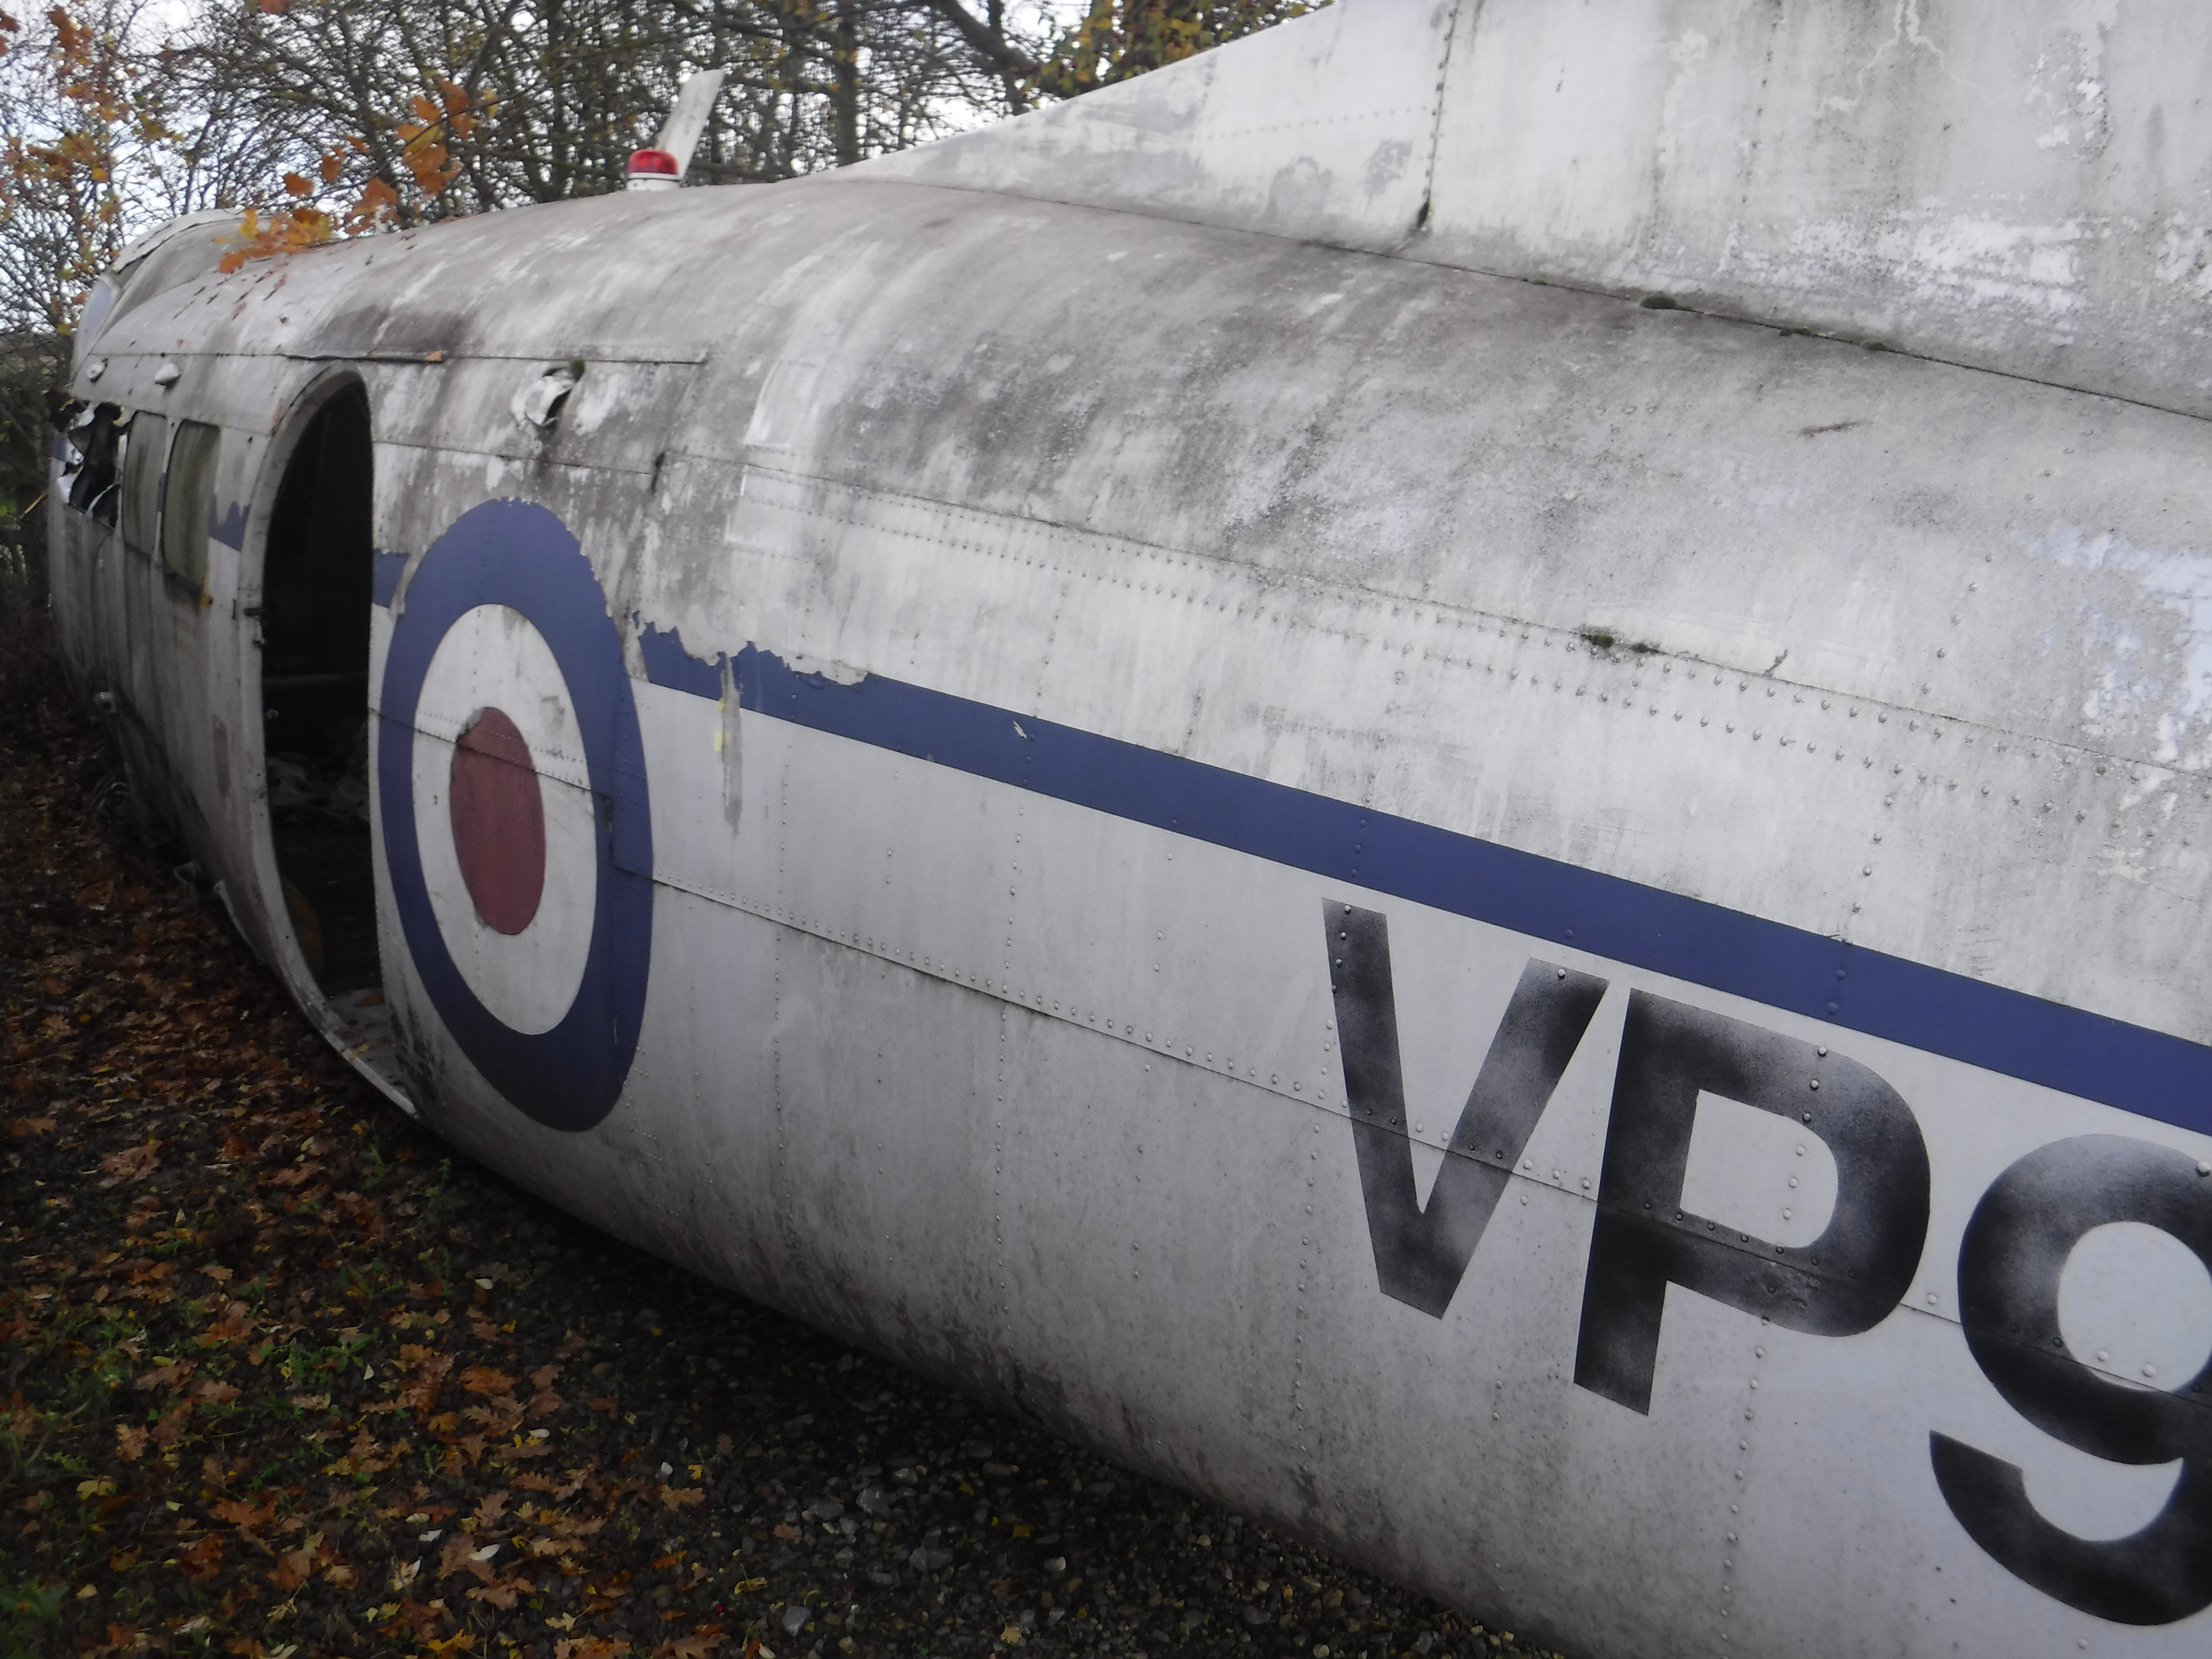 A De Havilland Dove aircraft fuselage "VP955" (believed to have been used for transporting various